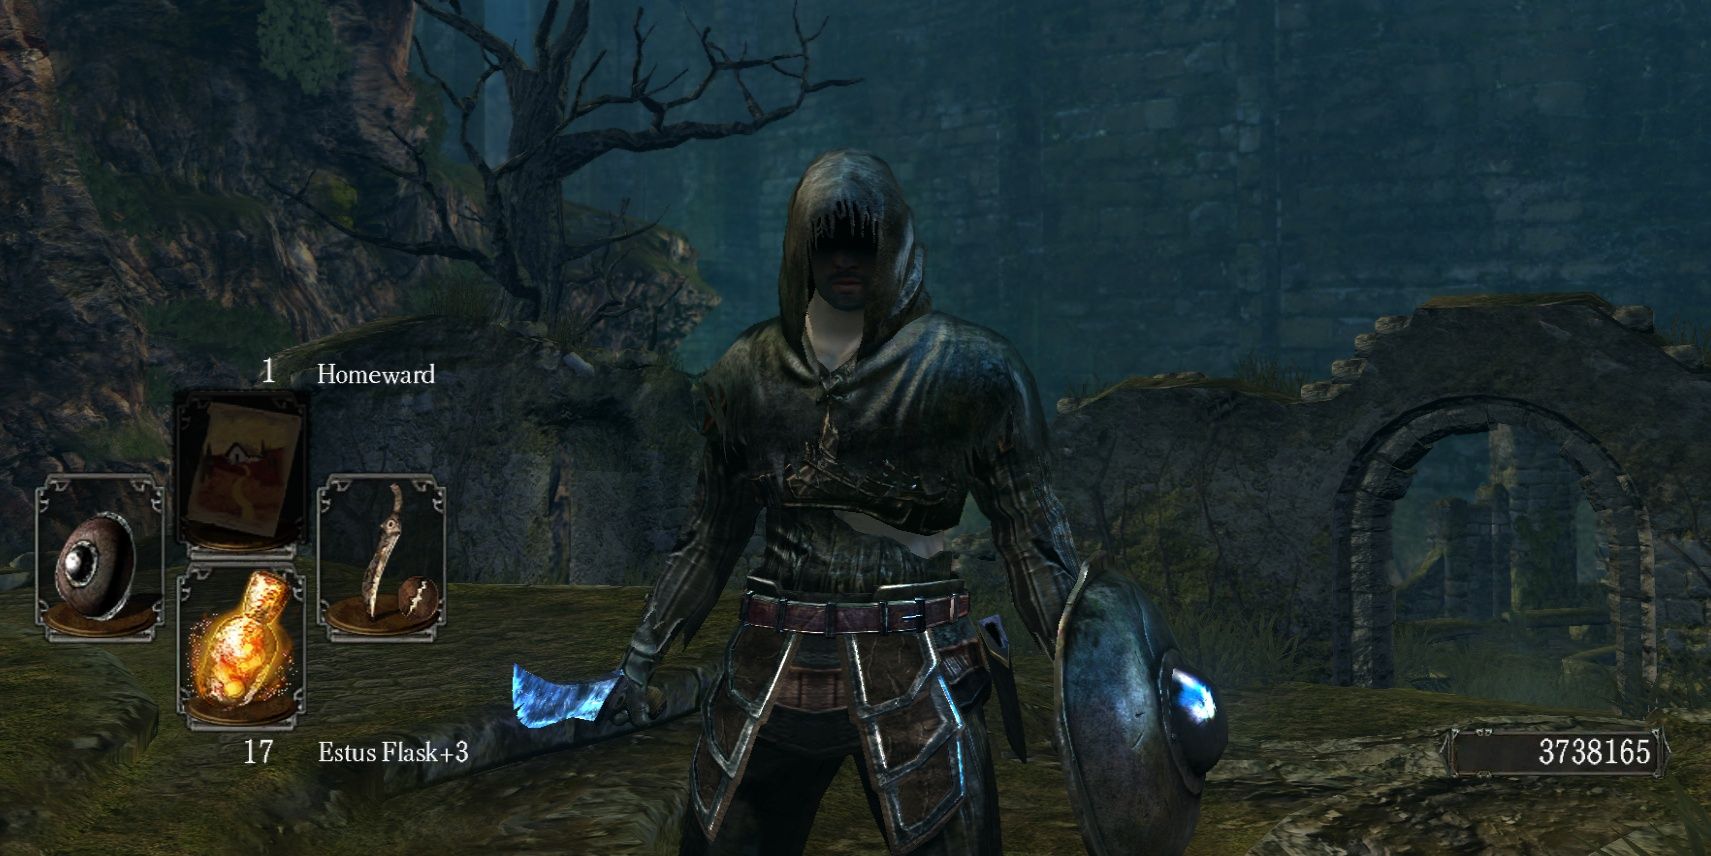 Hollow Thief Set from Dark Souls